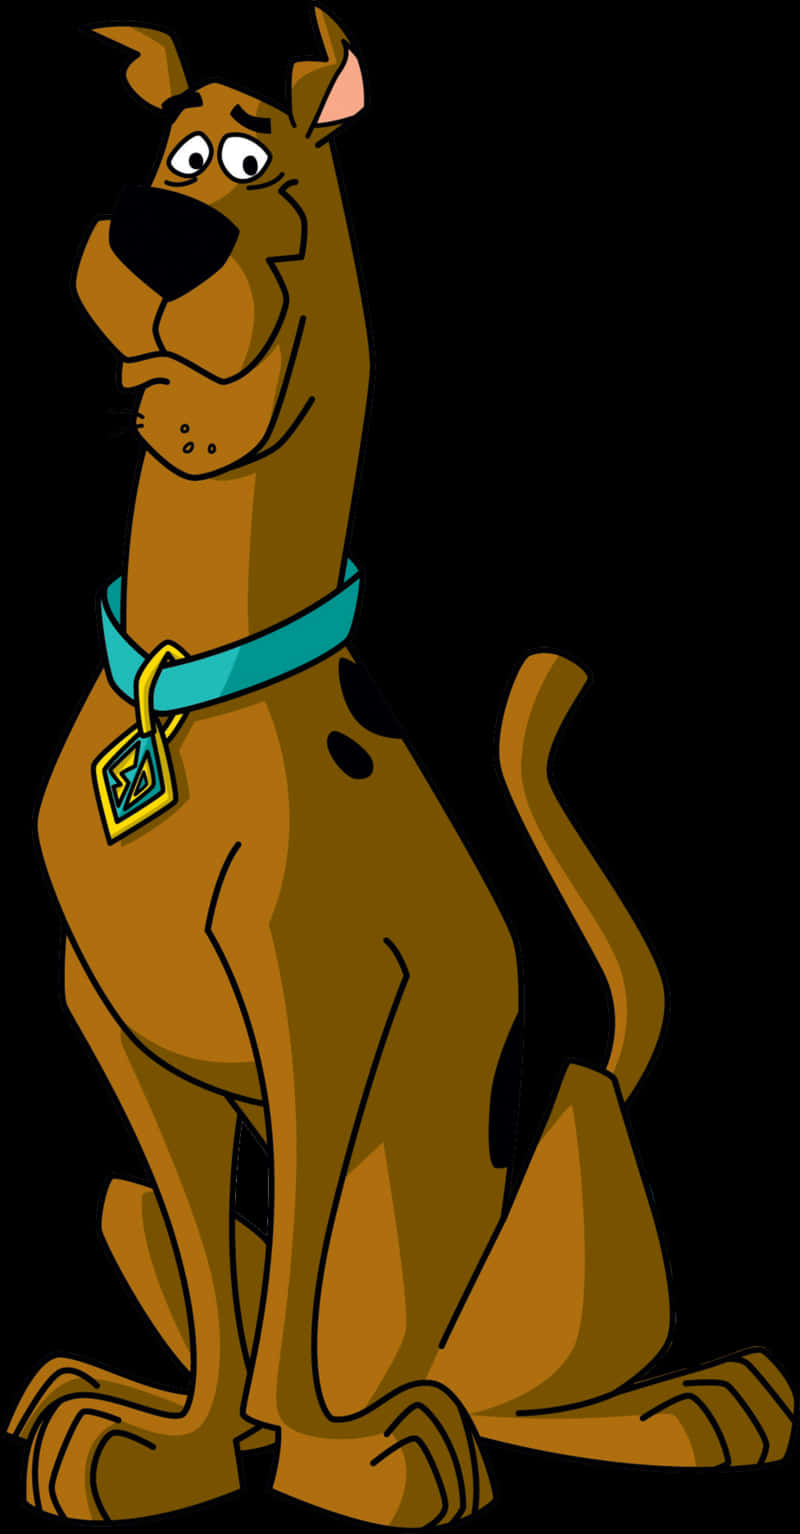 Scooby Doo Animated Character PNG